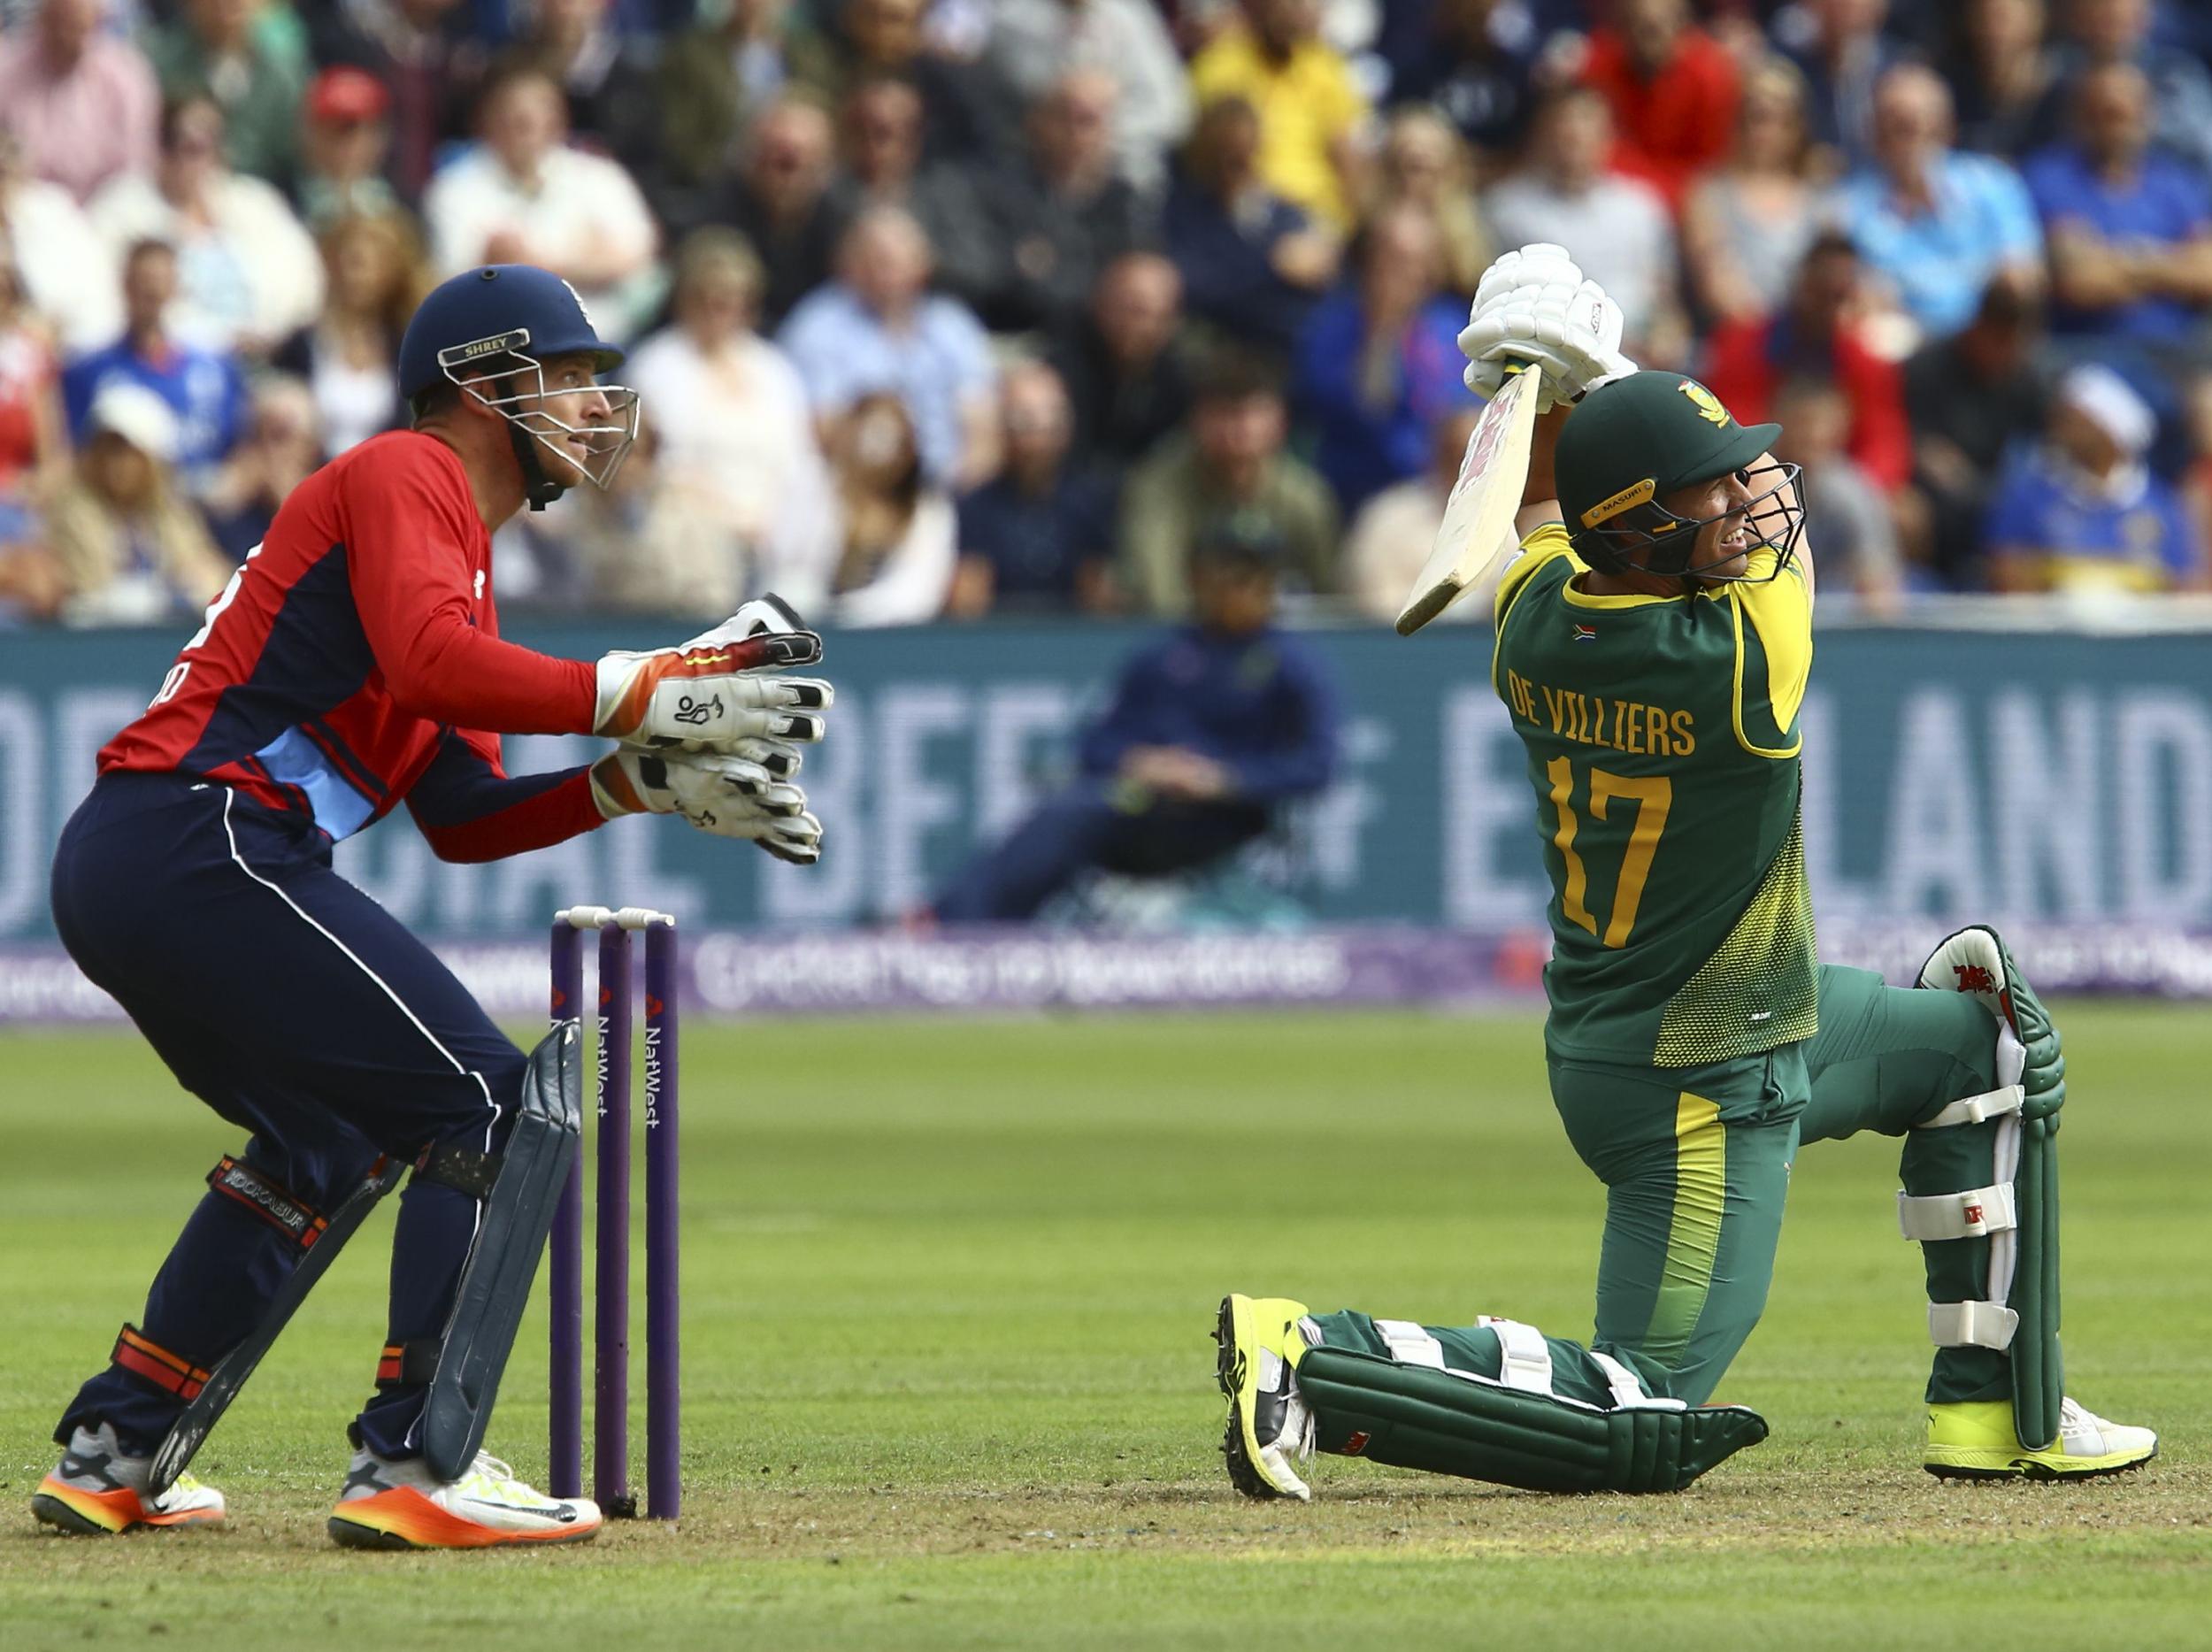 De Villiers is a legend of the game and has earned the right when to walk away (Getty )